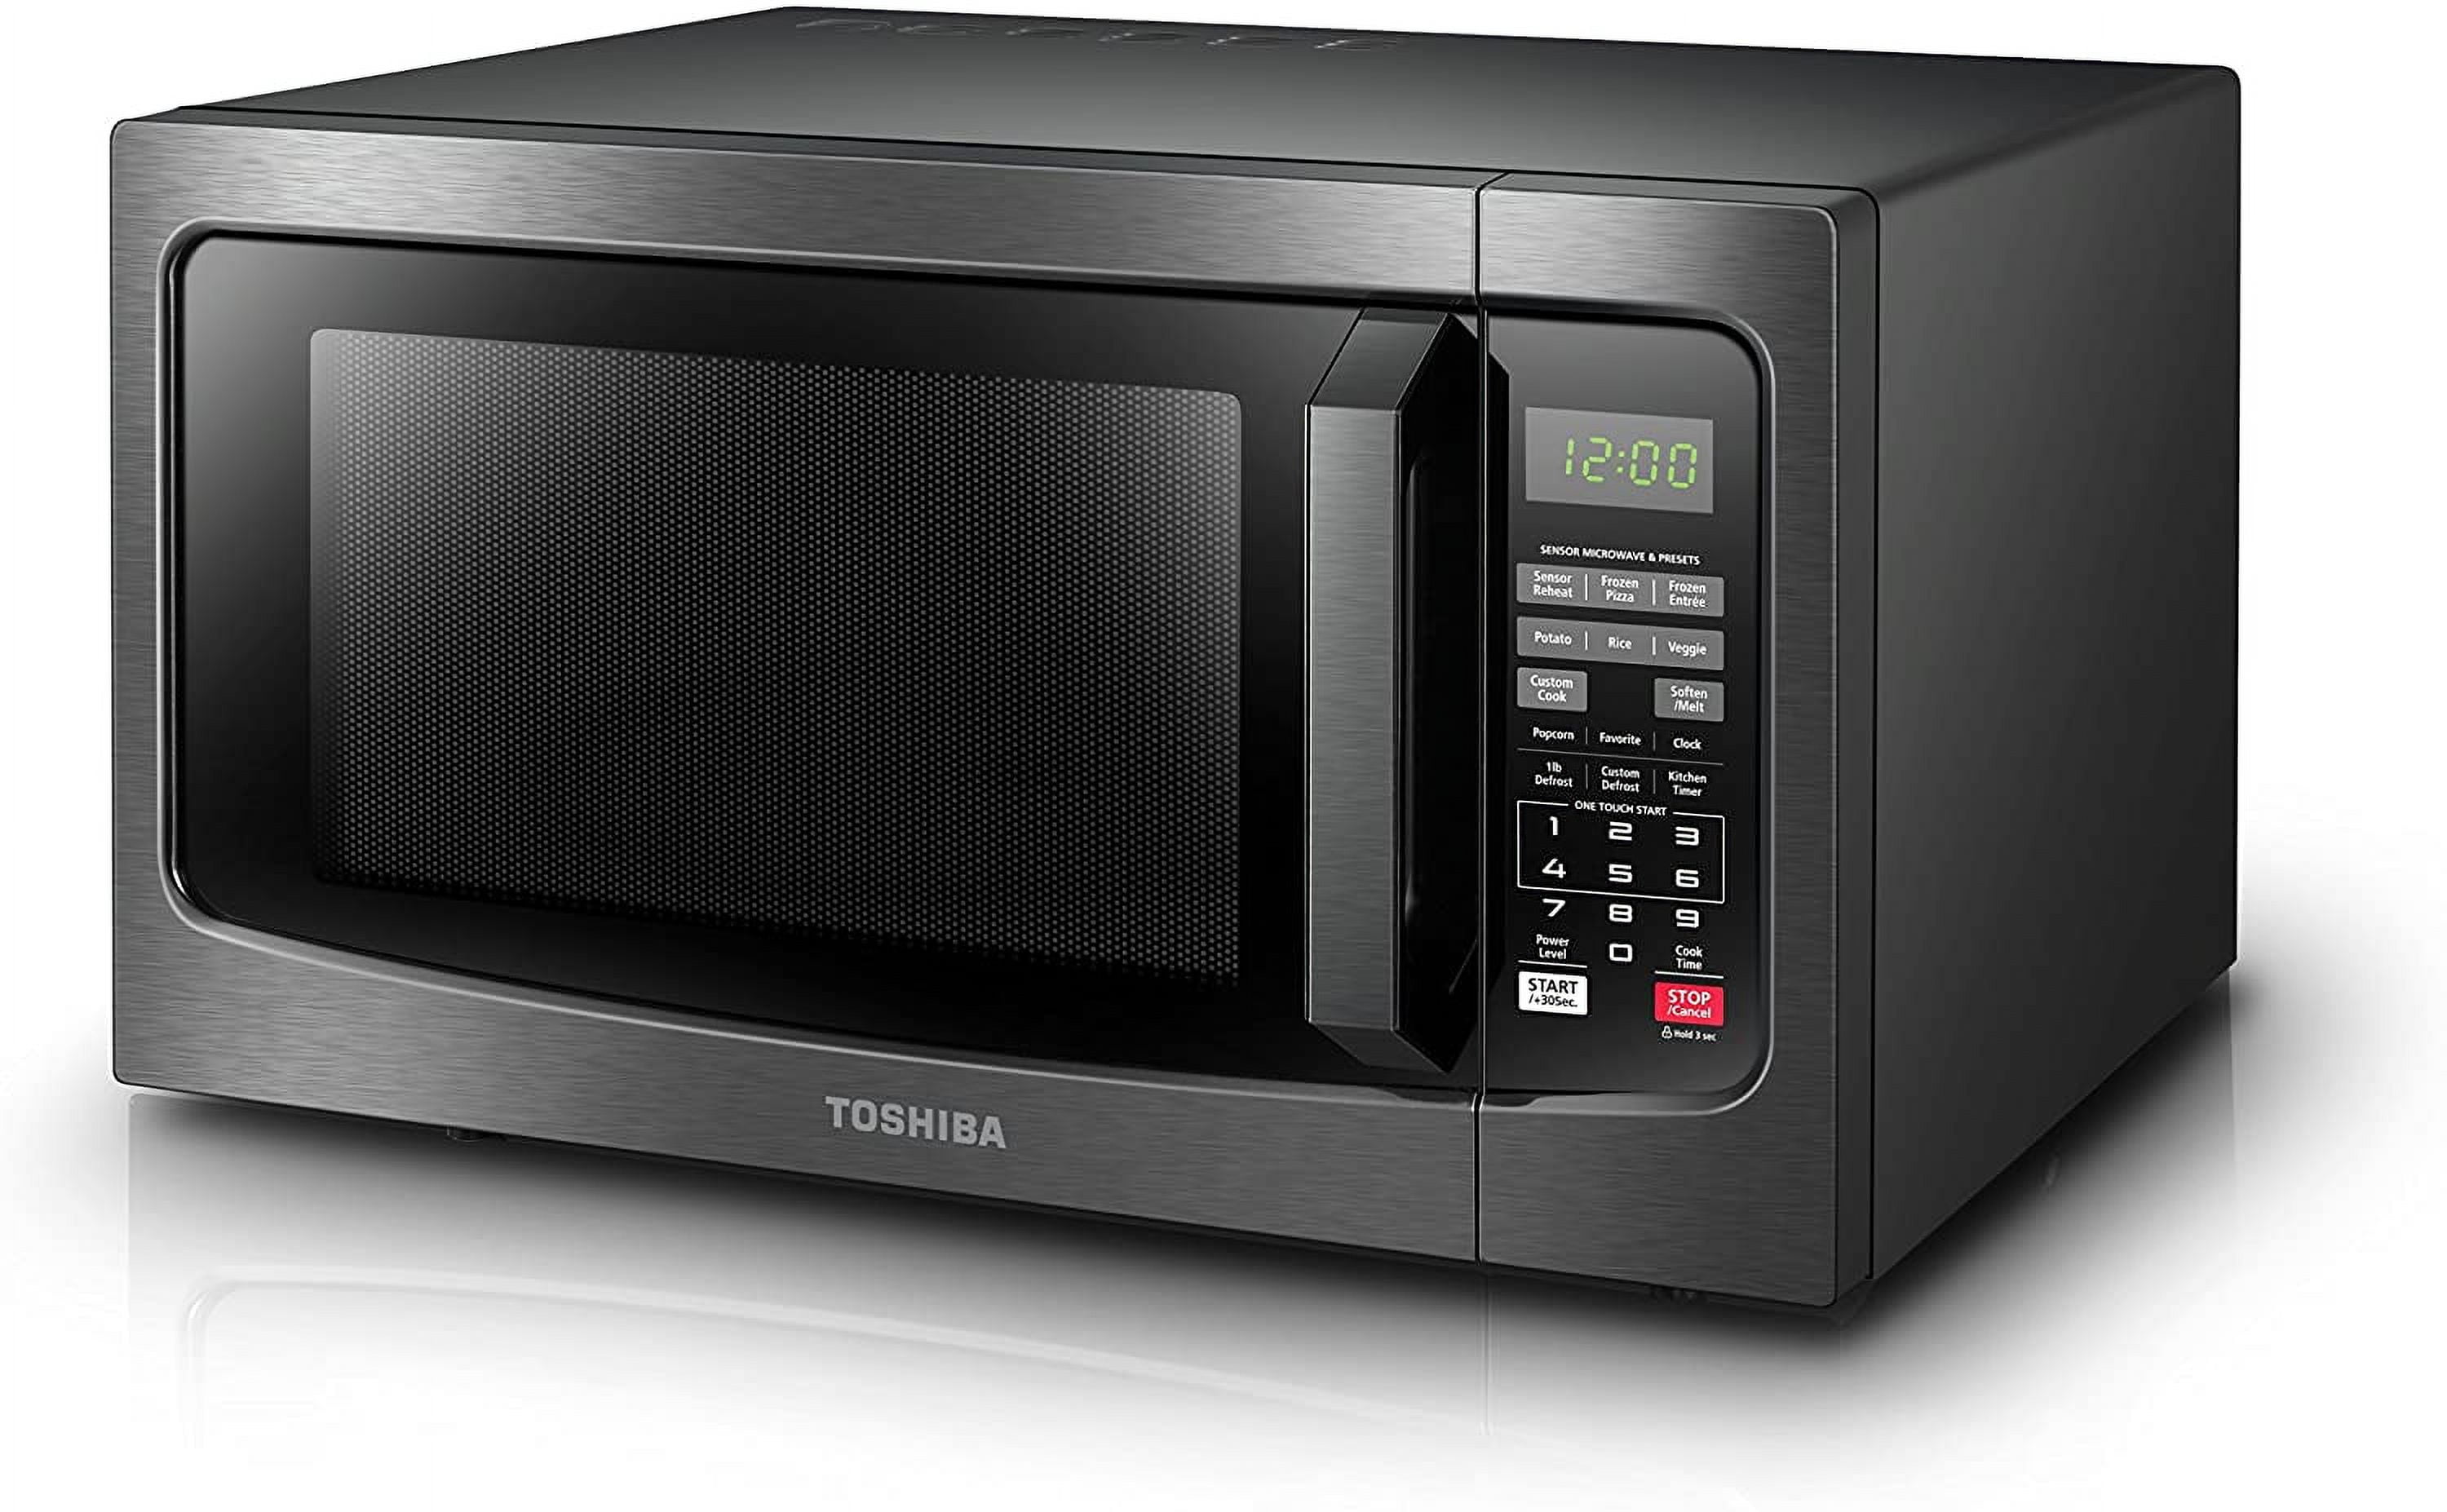 Toshiba Air Fryer Review TOSHIBA ML2-EC10SA(BS) 8-in-1 Countertop Microwave  Combo, Convection, Broil 